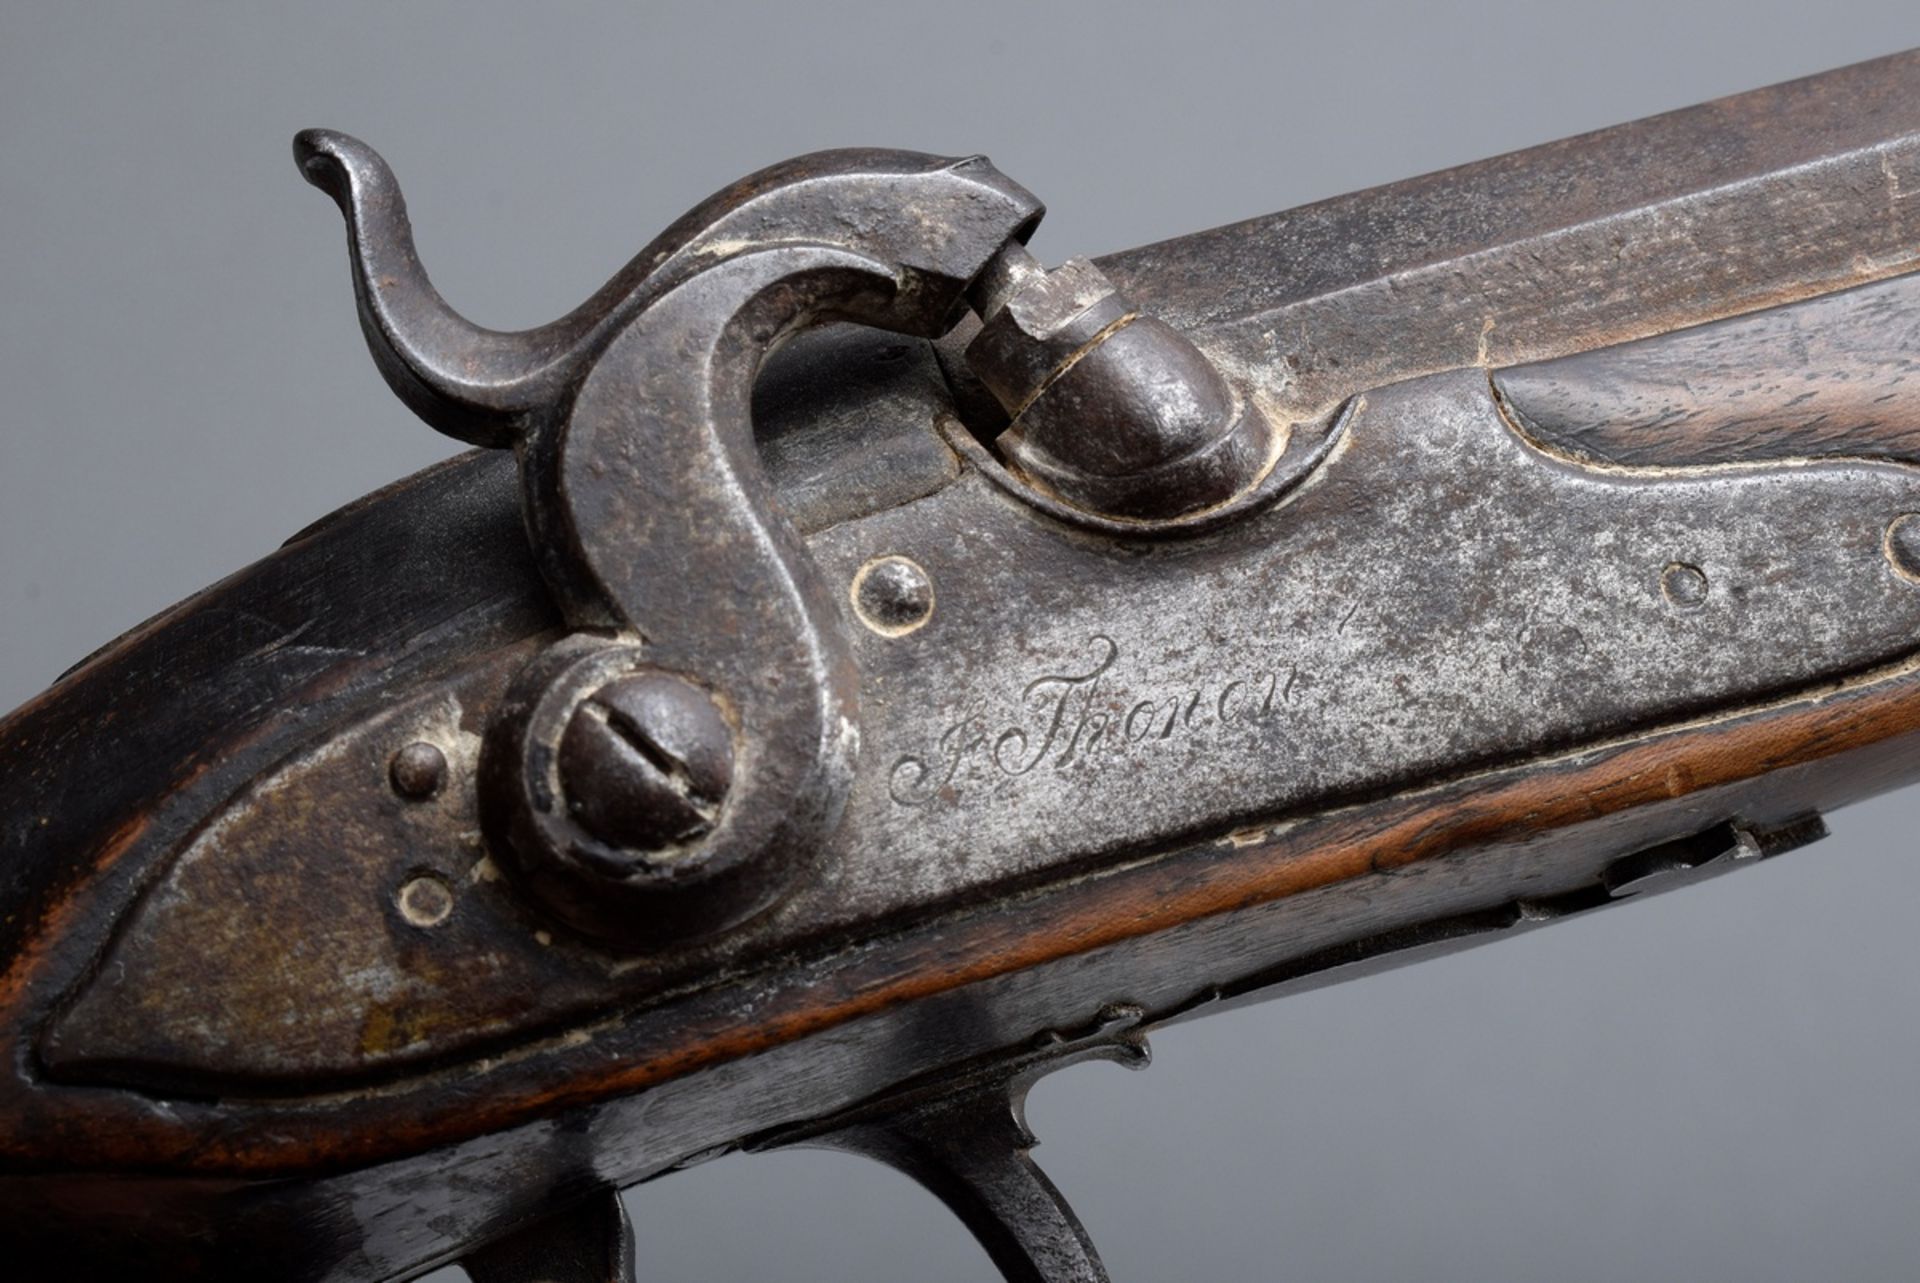 Antike Vorderladerpistole mit Percussionsschloss | Antique muzzle-loading pistol with percussion lo - Image 3 of 11